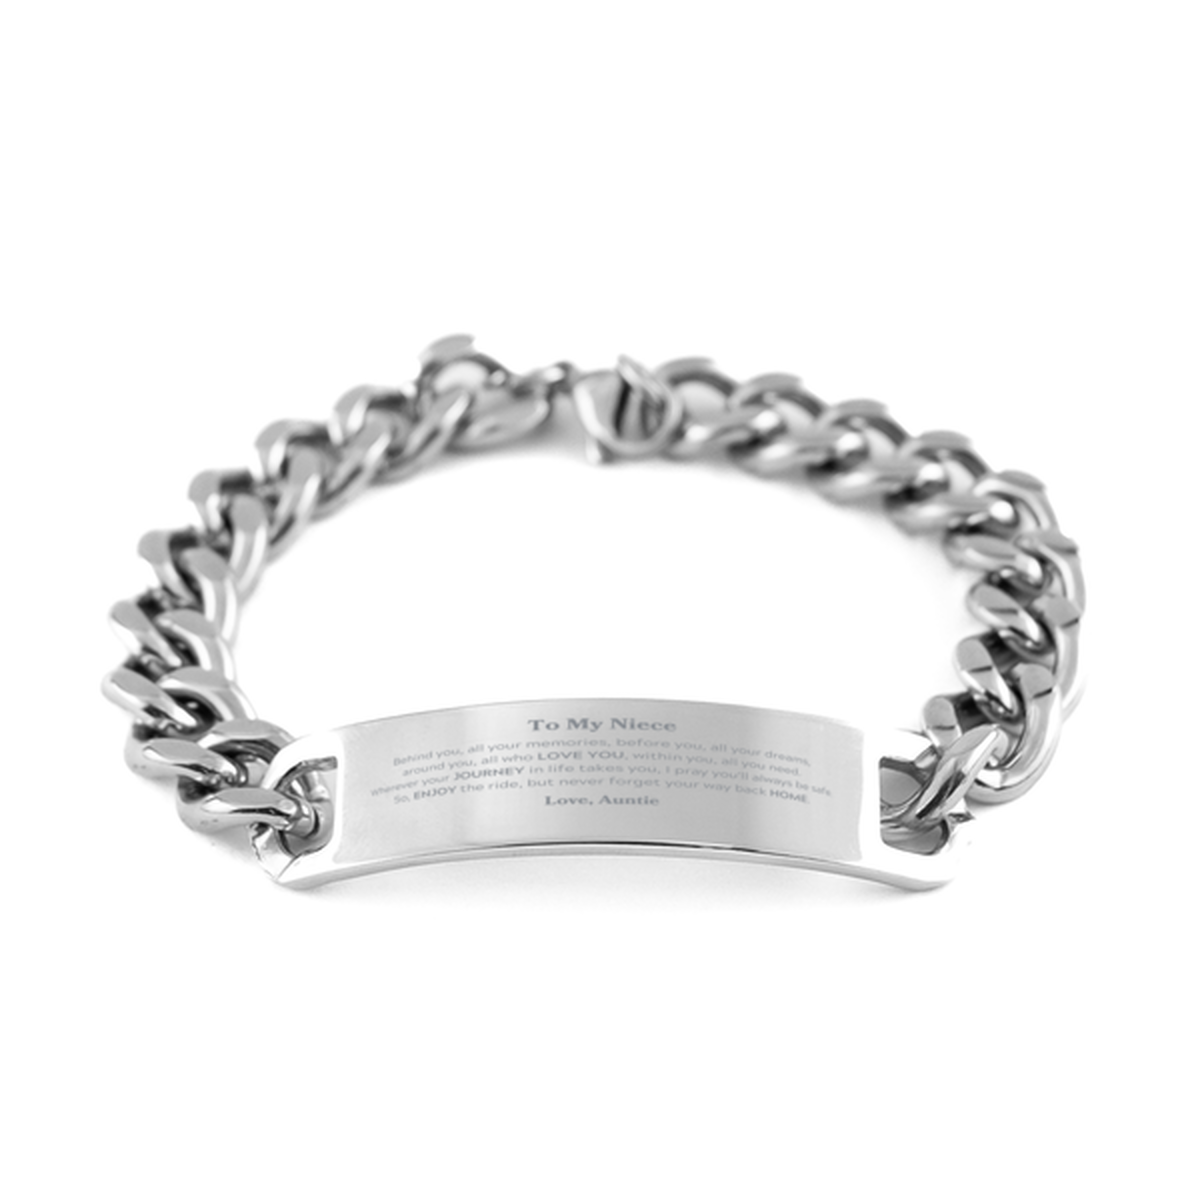 To My Niece Graduation Gifts from Auntie, Niece Cuban Chain Stainless Steel Bracelet Christmas Birthday Gifts for Niece Behind you, all your memories, before you, all your dreams. Love, Auntie